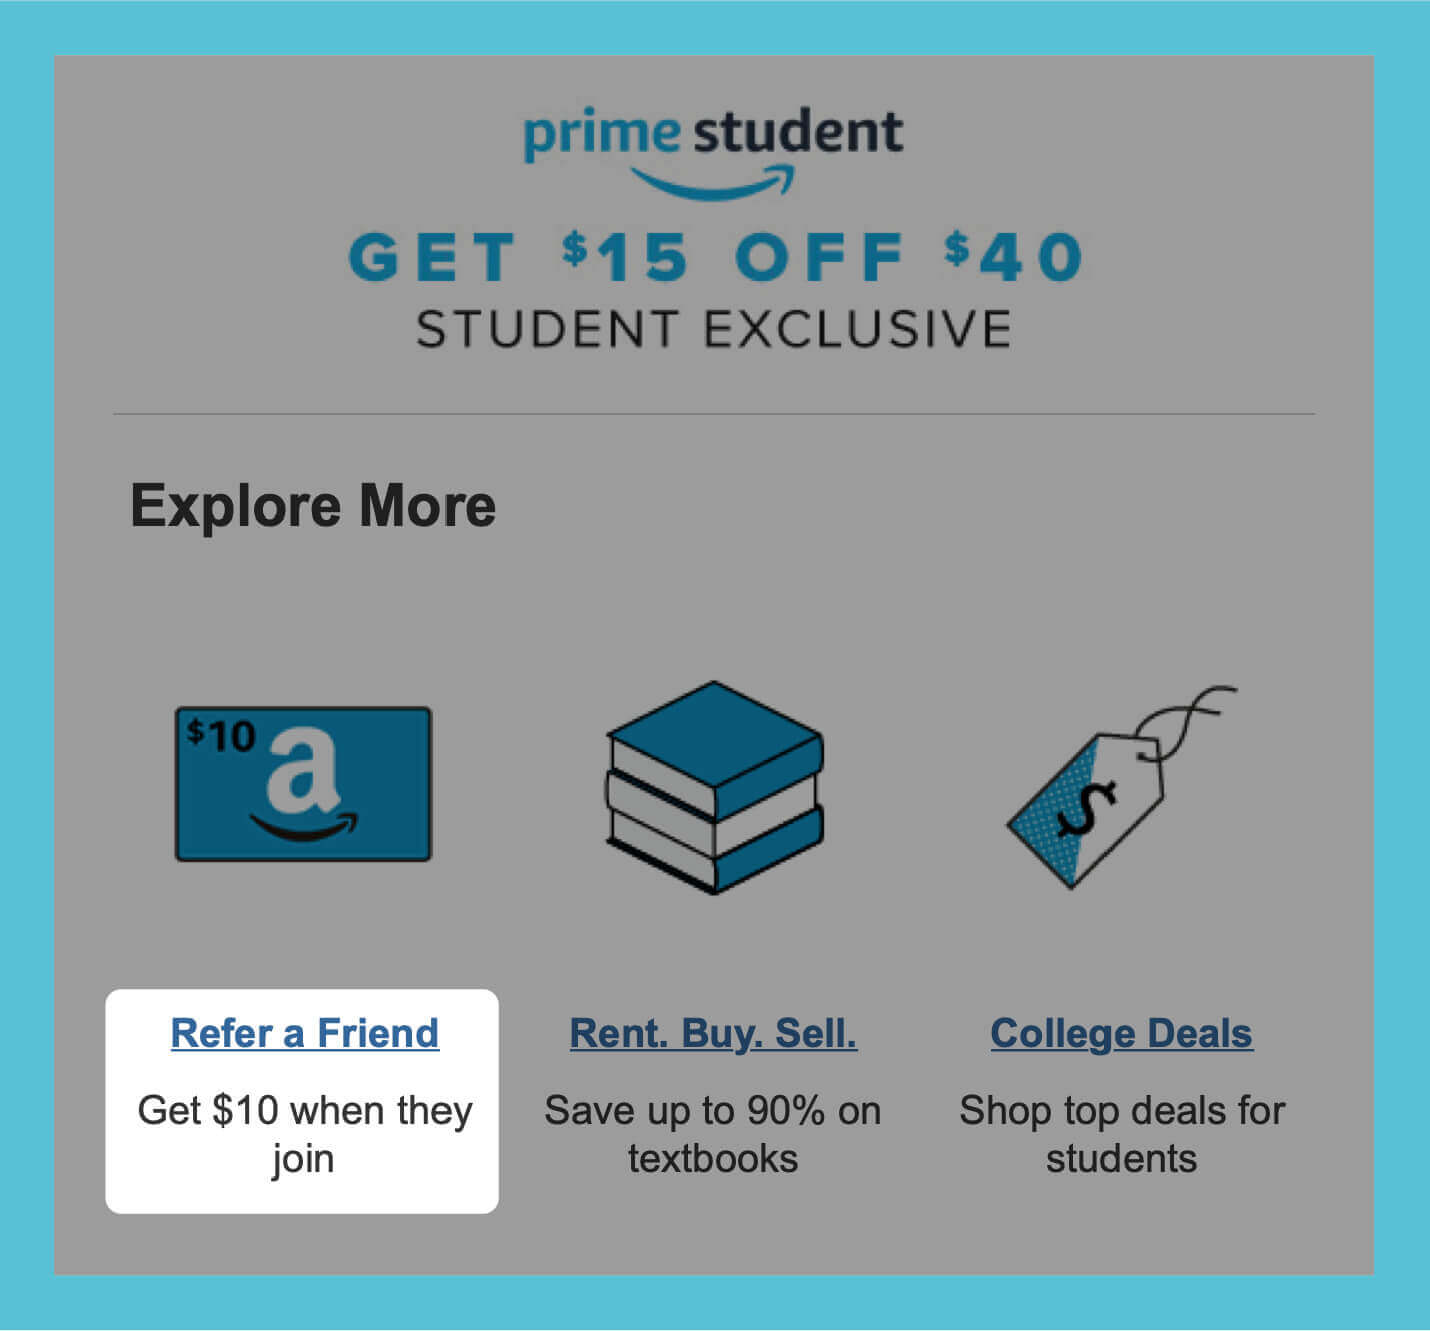 referral email example from amazon prime student targeting demographics likely to share